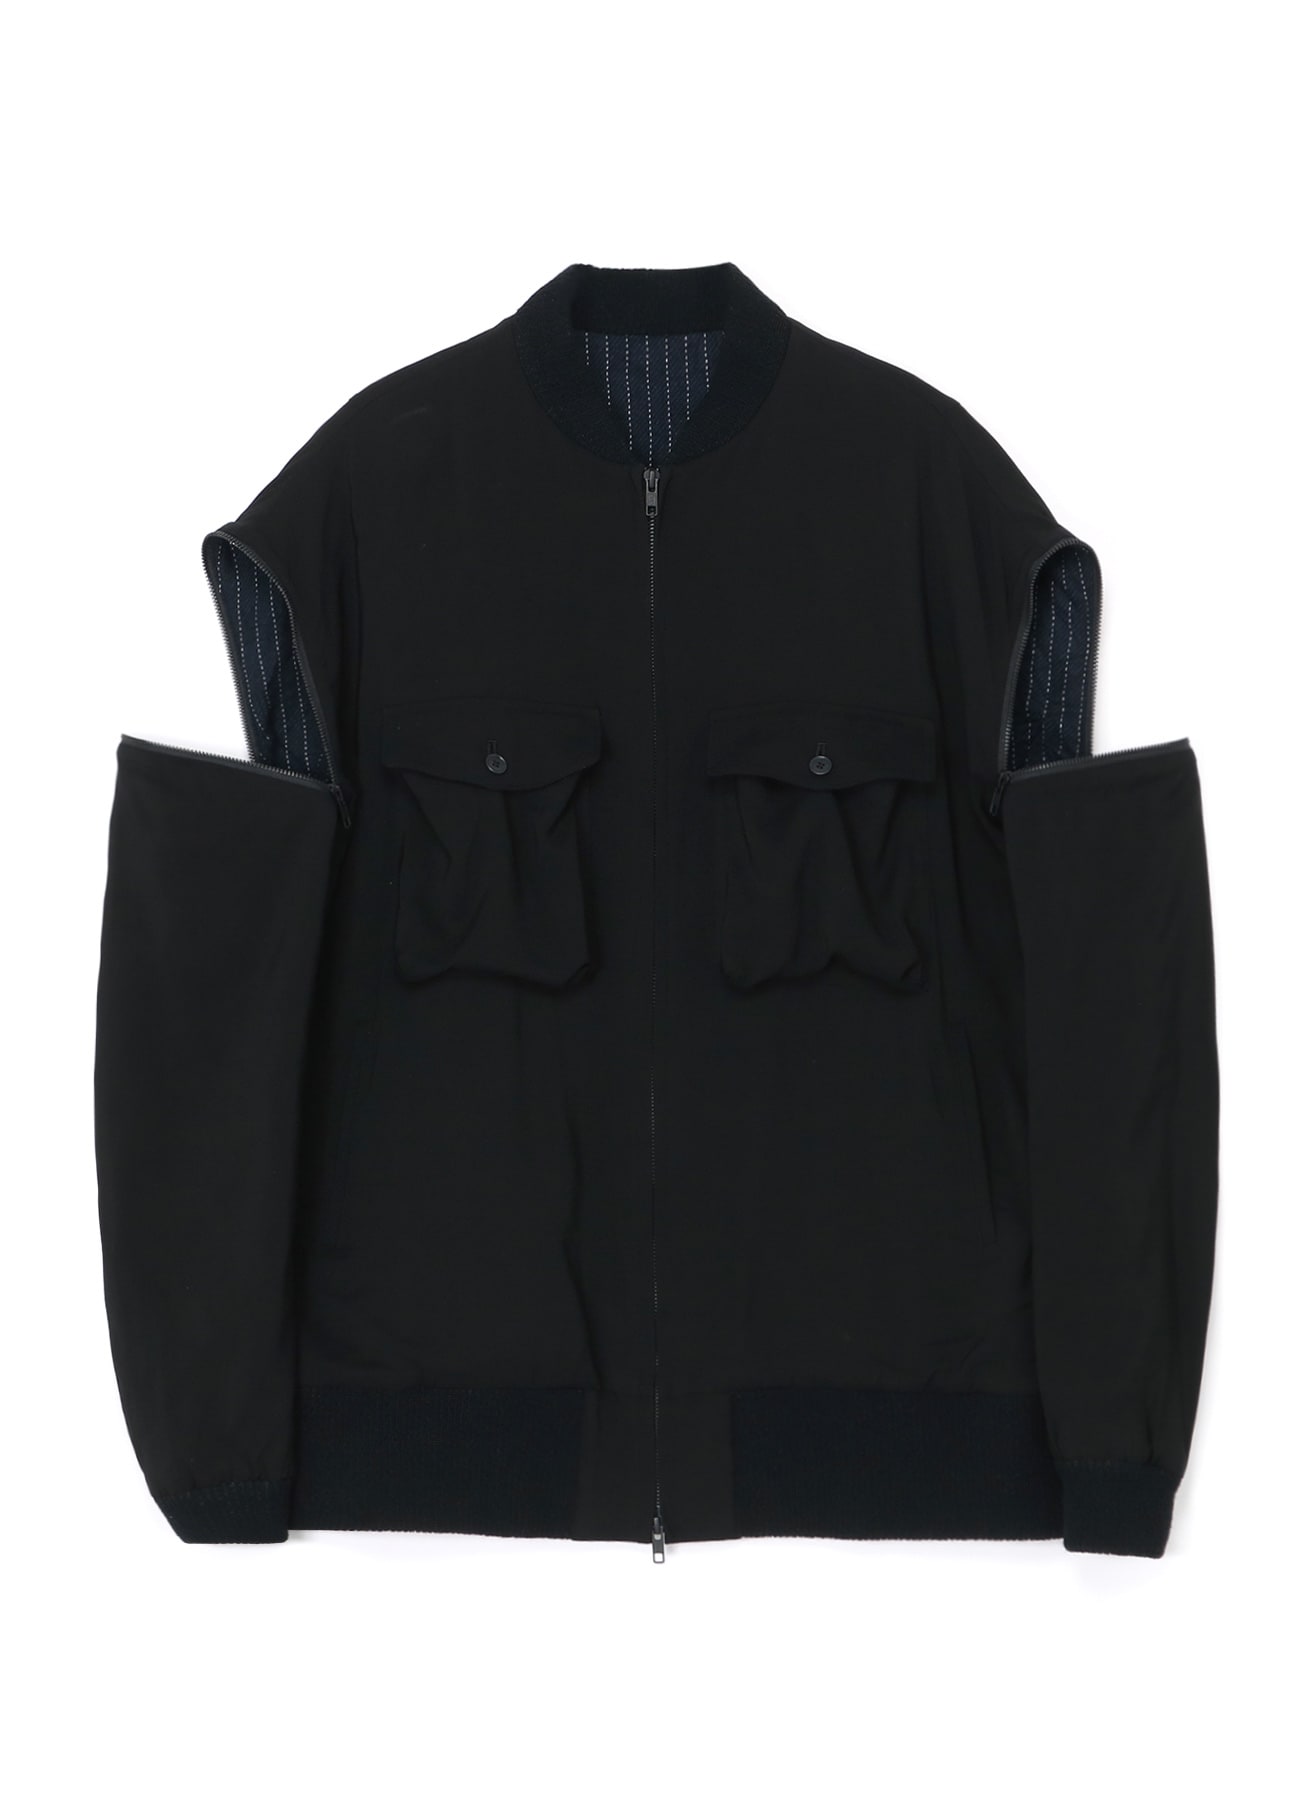 BLOUSON WITH CHEST POCKETS